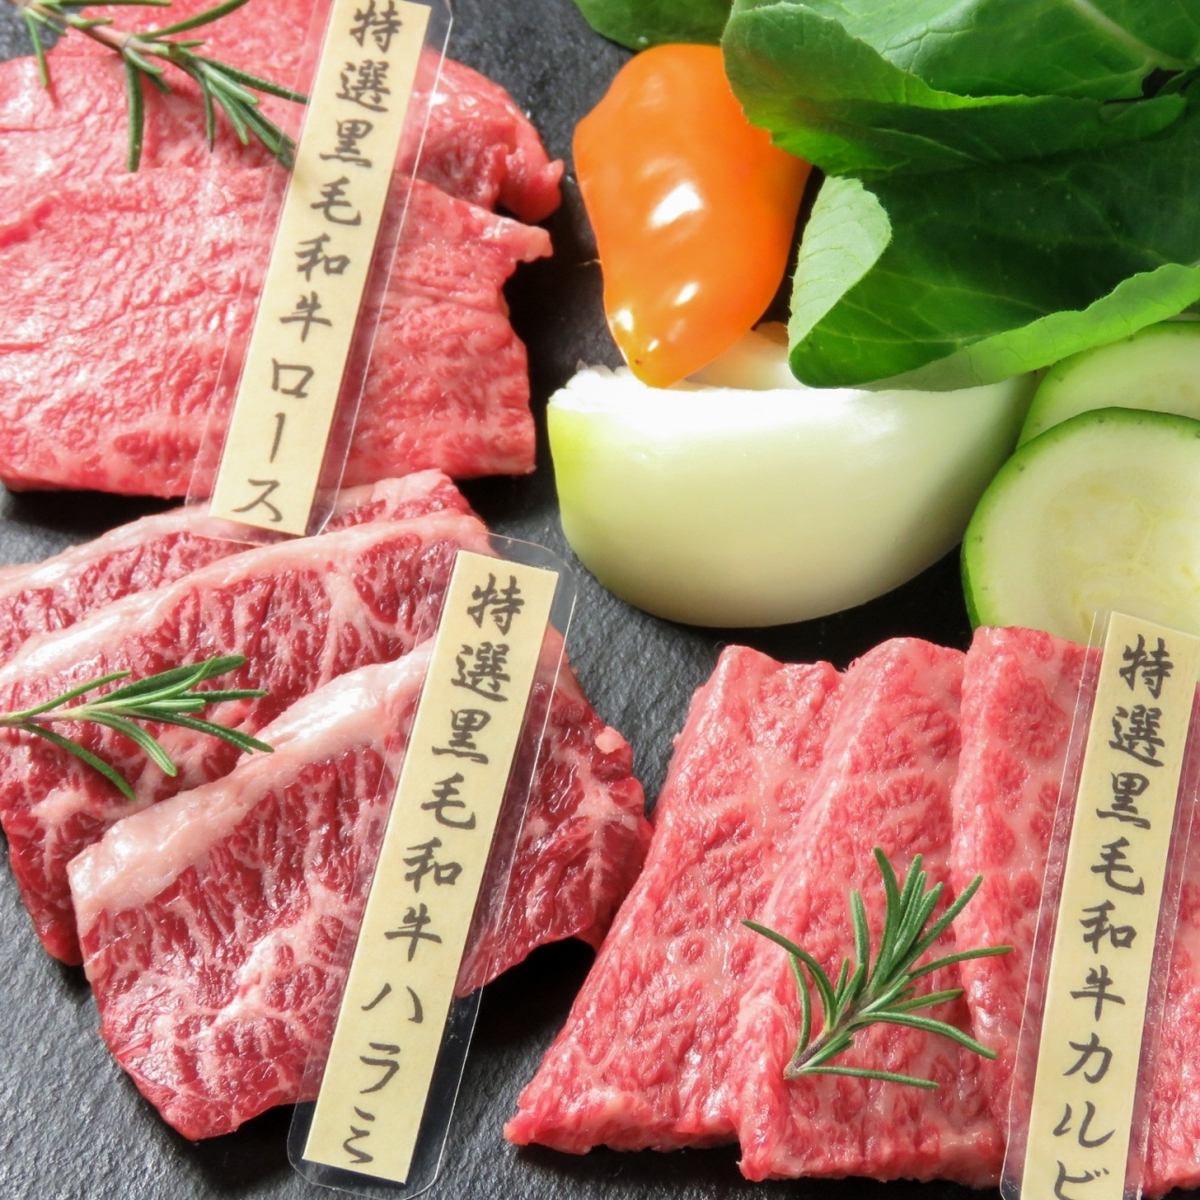 There is no doubt that you can easily enjoy the special Wagyu beef!